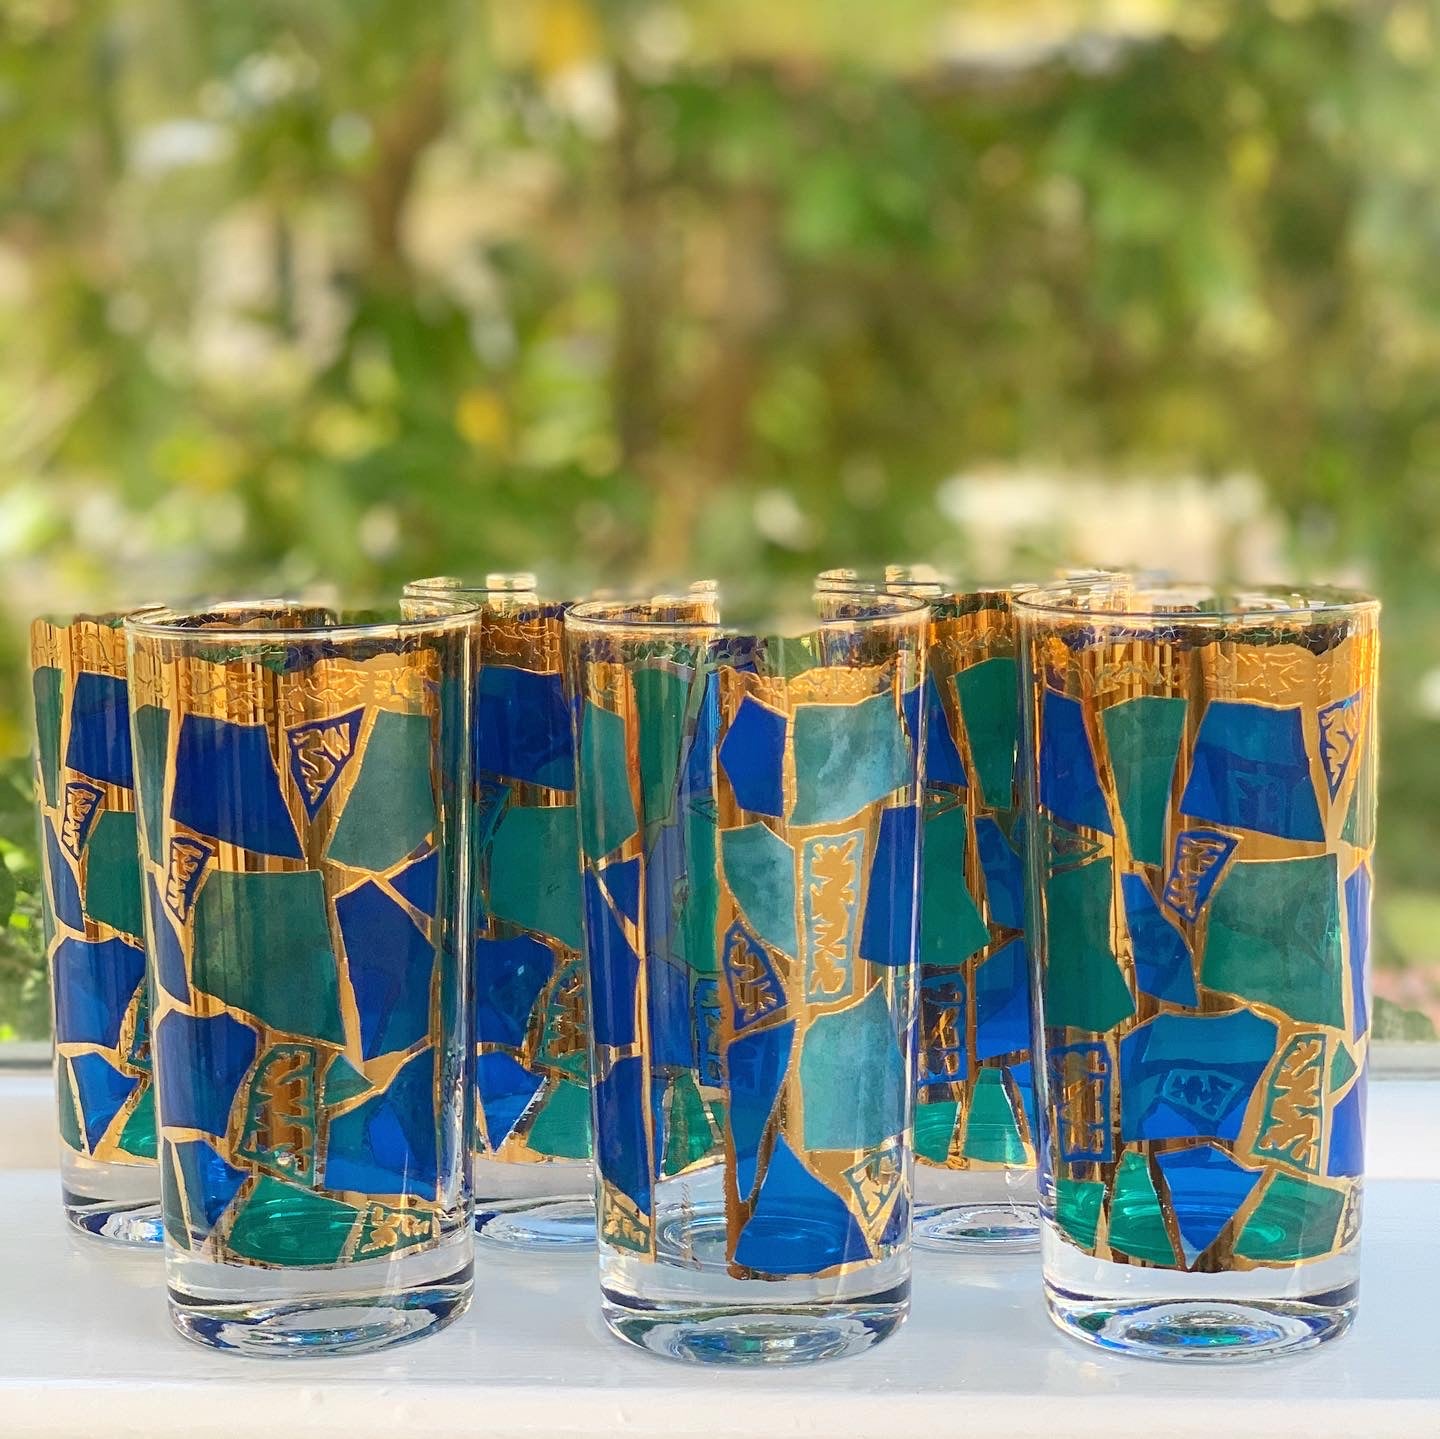 22K Gold Mosaic or Stained Glass Highball Glasses, Set of 6 (1960)